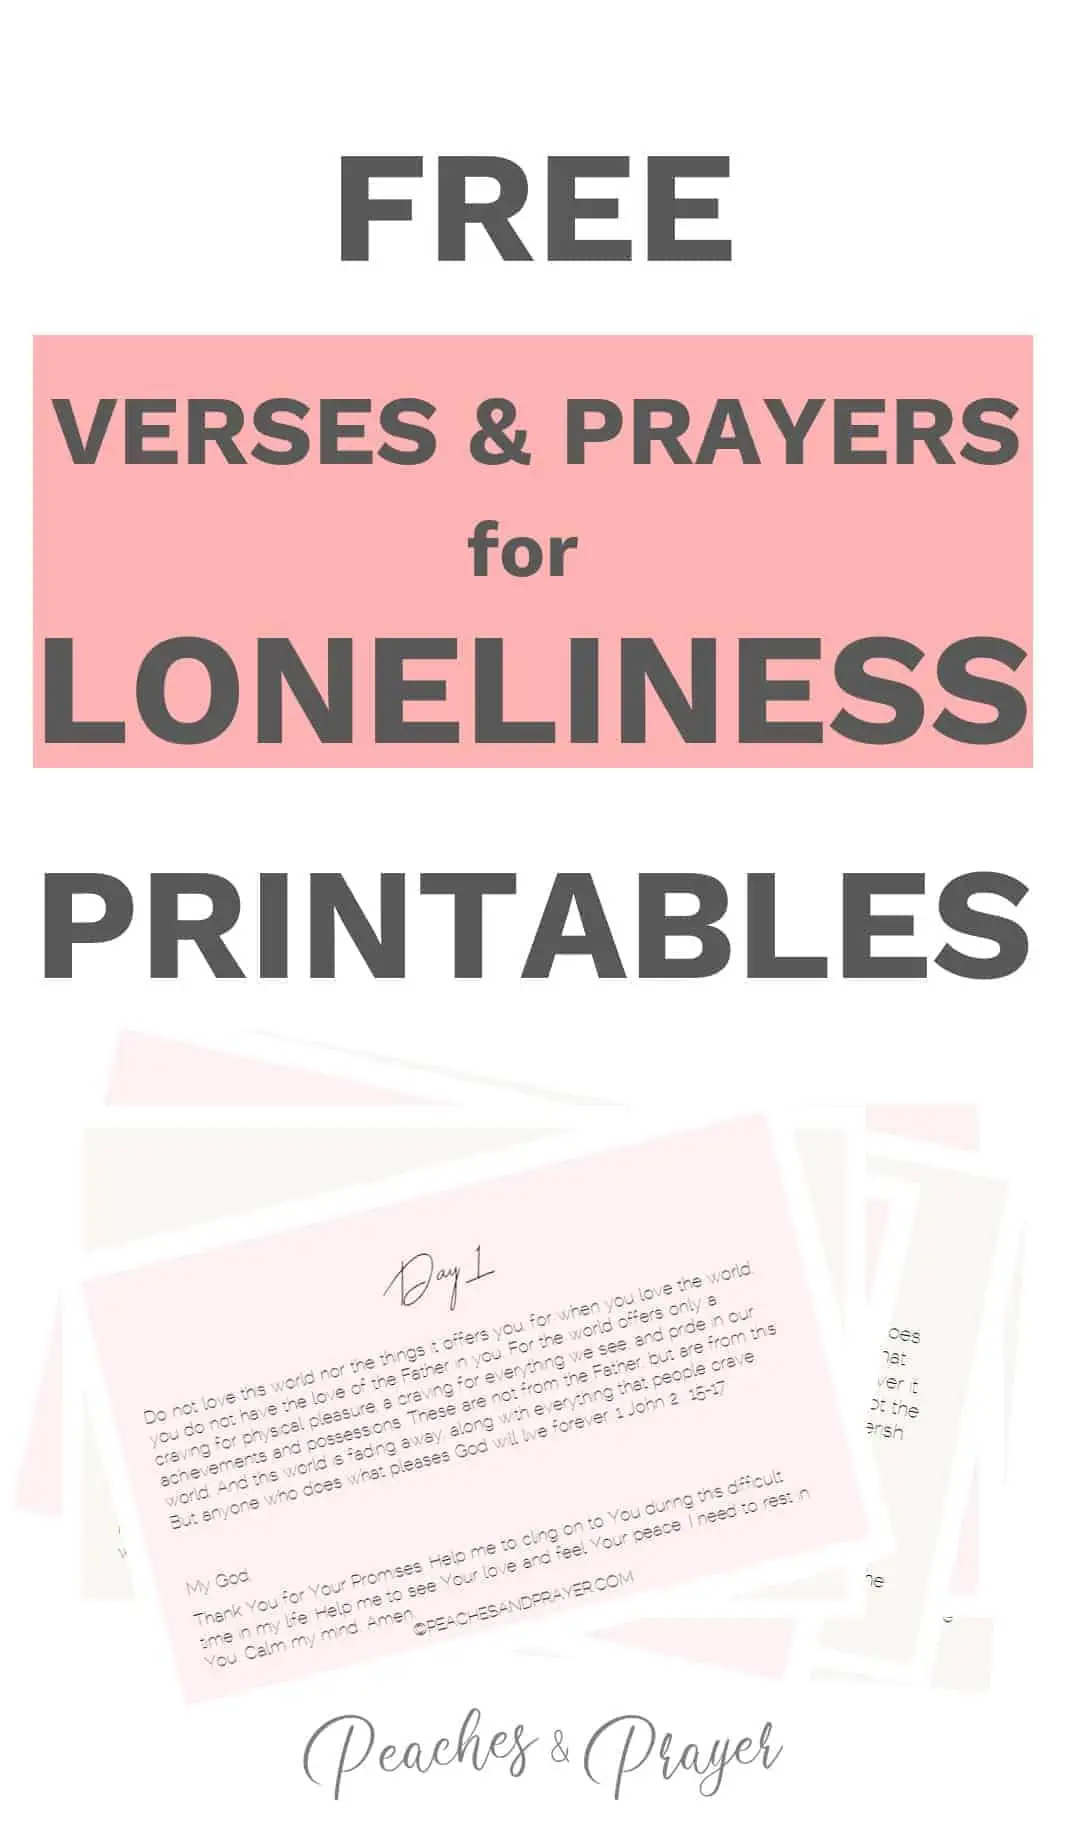 7 Life Changing Bible Verses for Loneliness